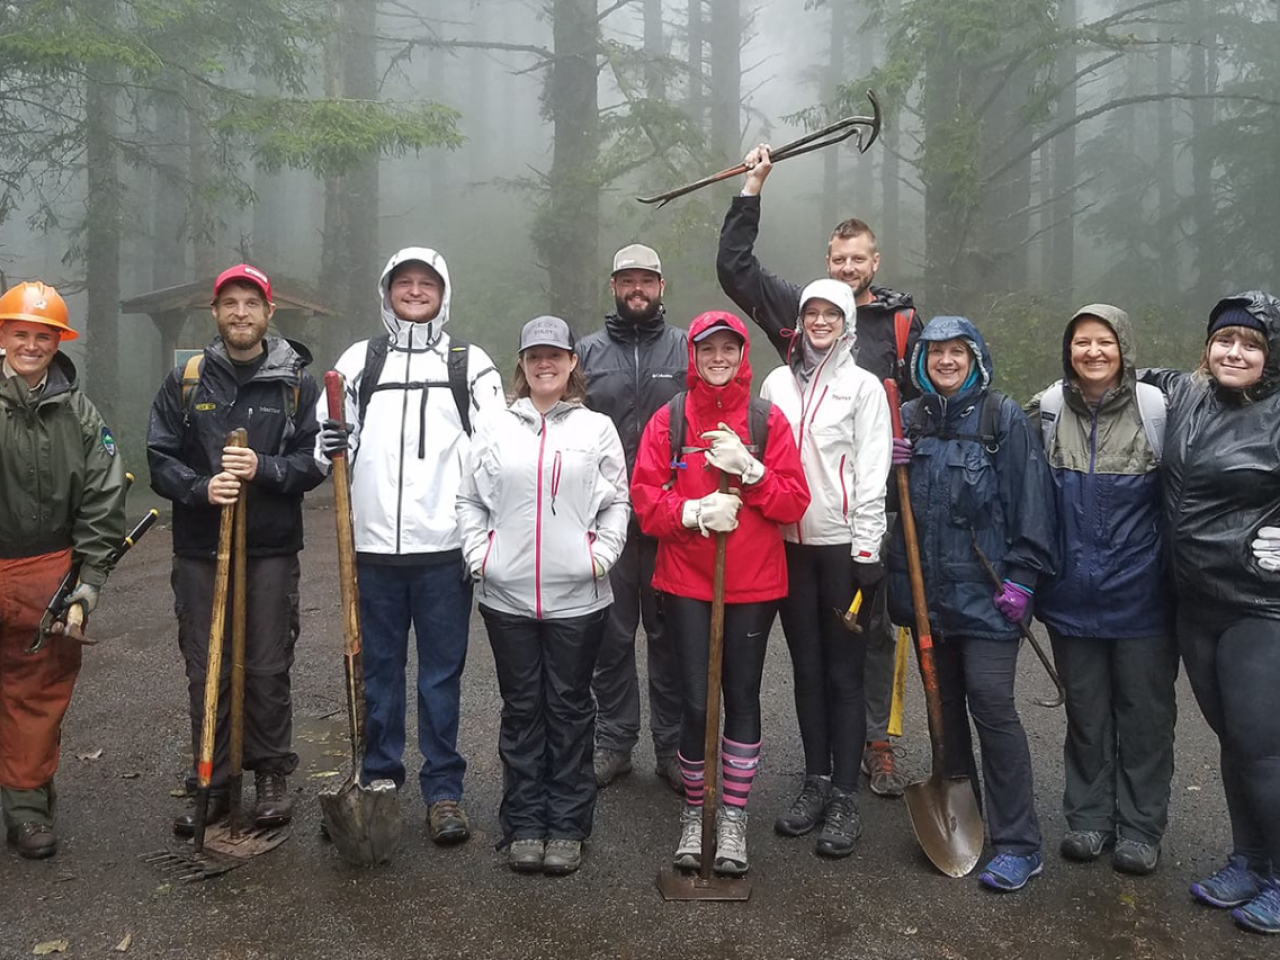 group picture of hikers